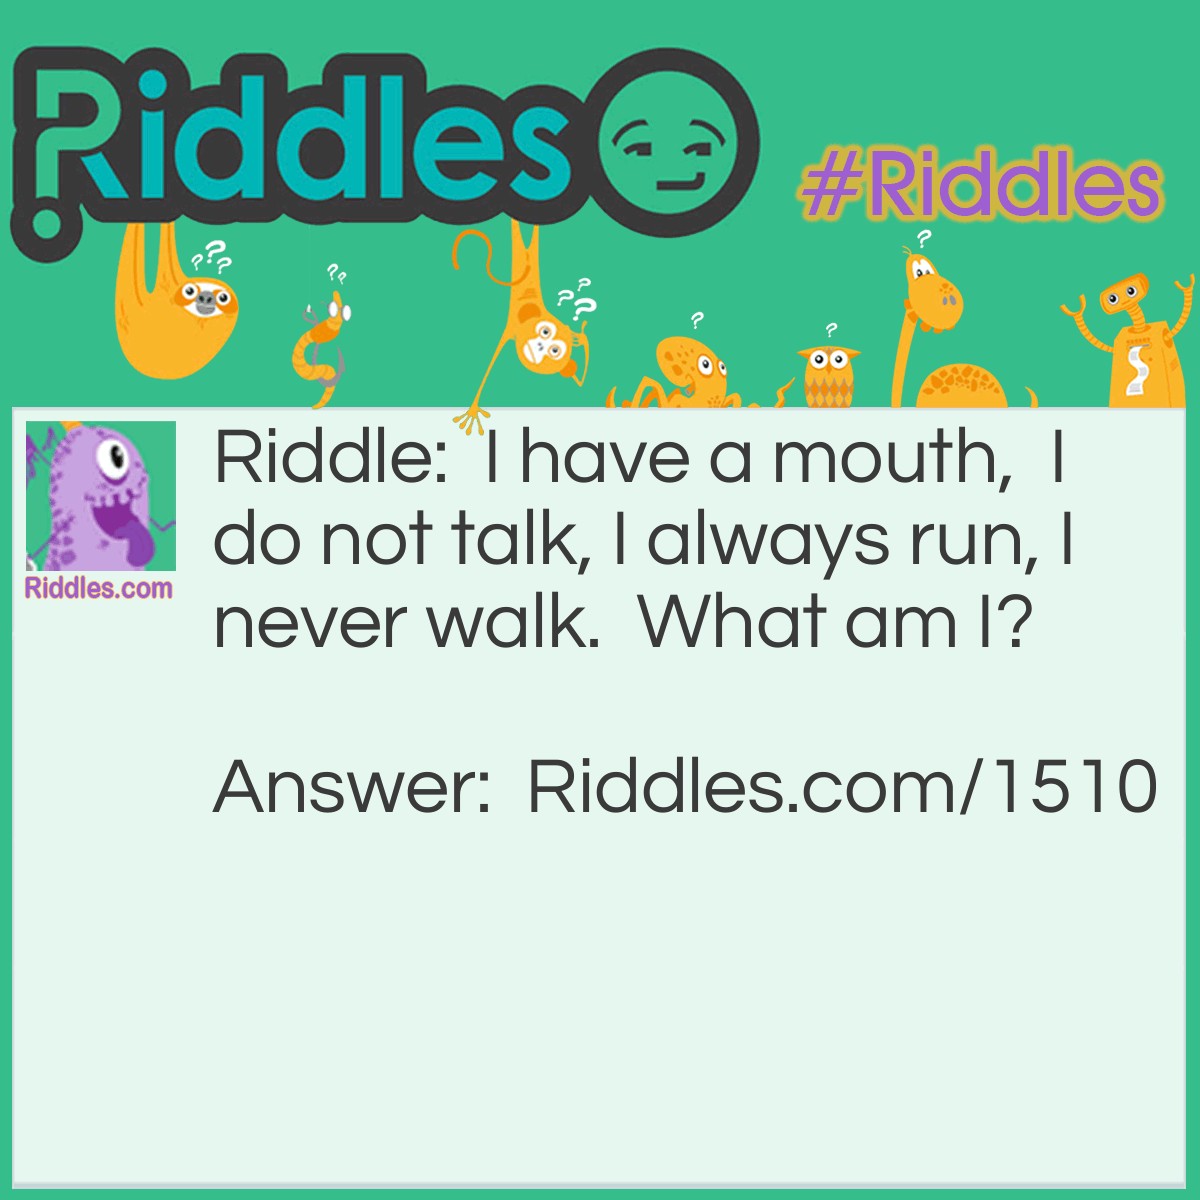 Riddle: I have a mouth,  I do not talk, I always run, I never walk.  What am I? Answer: A river.